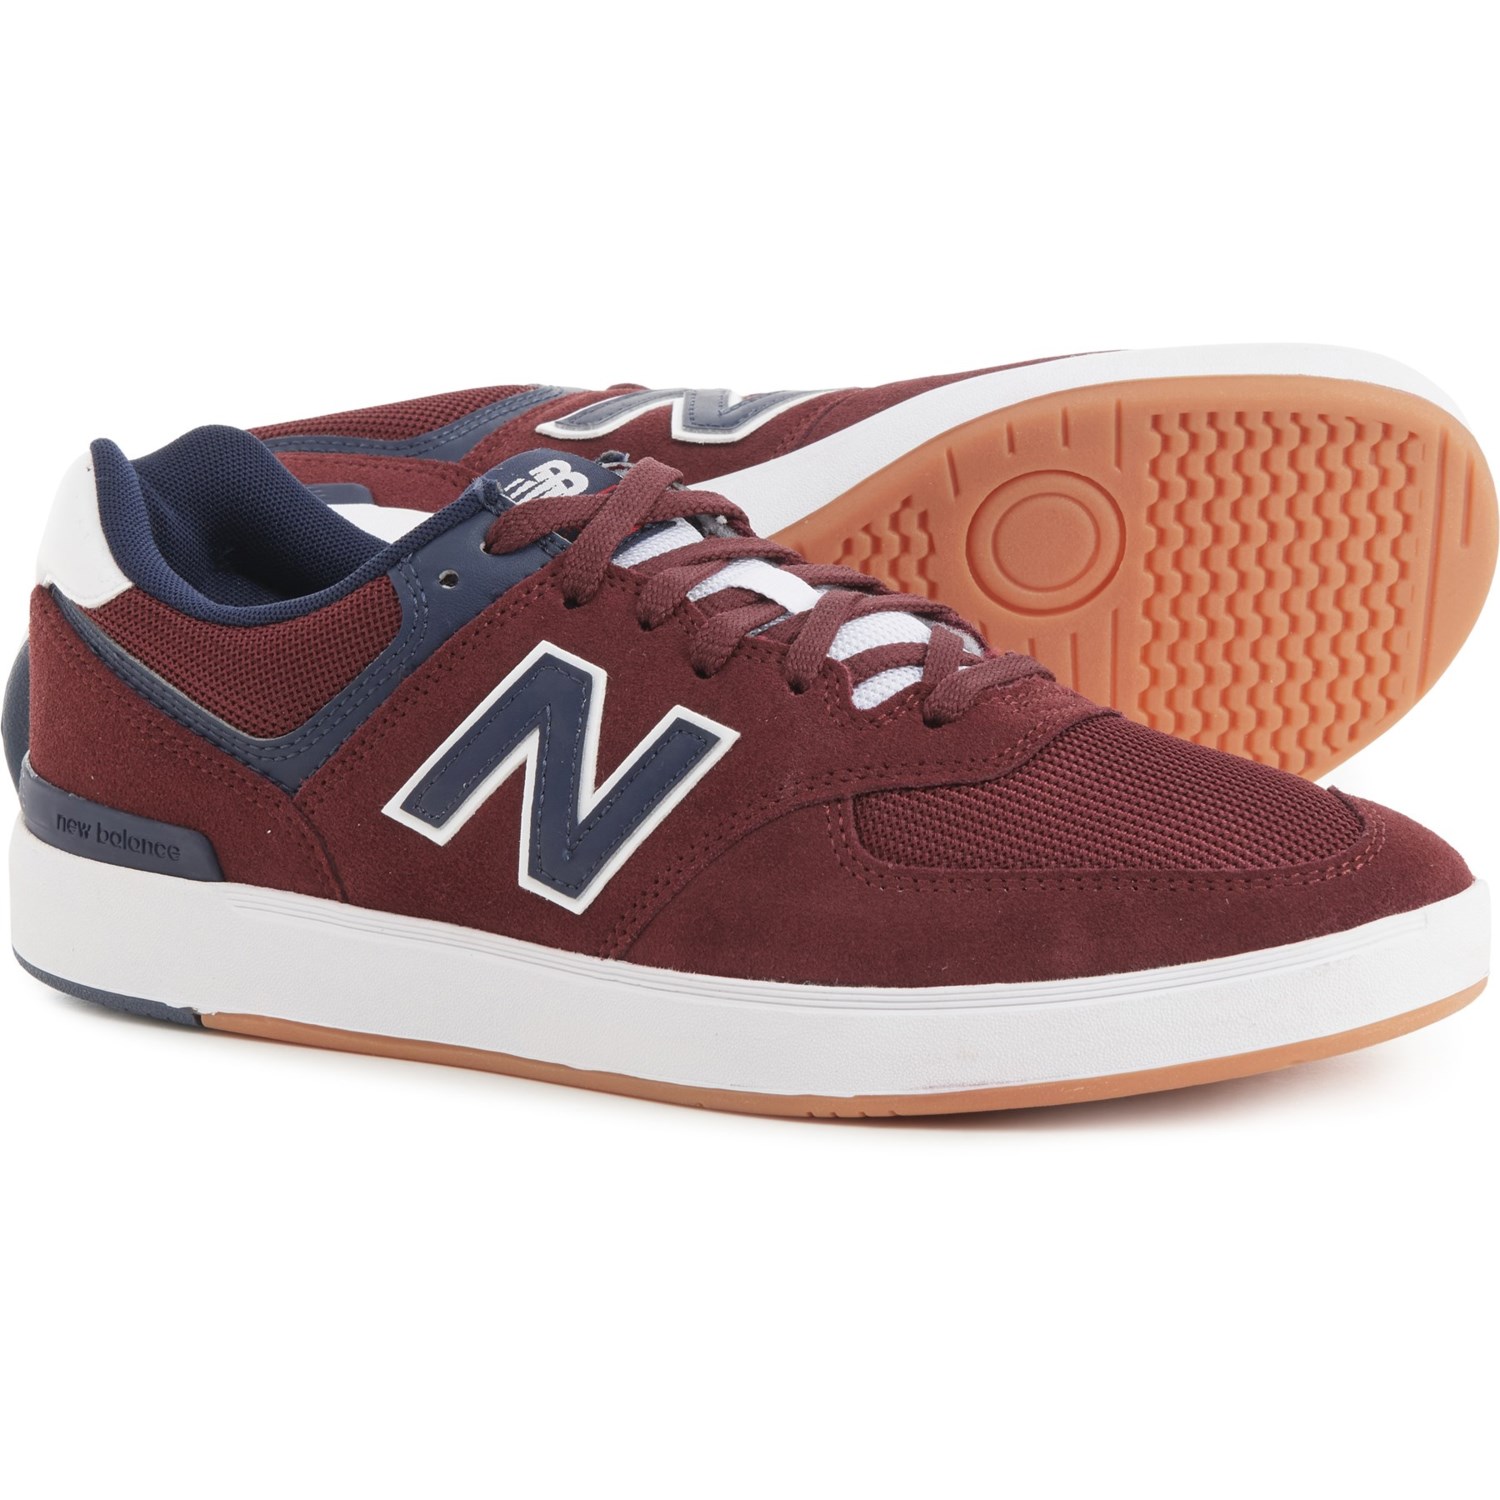 New Balance 574 Sneakers - Suede (For Men)